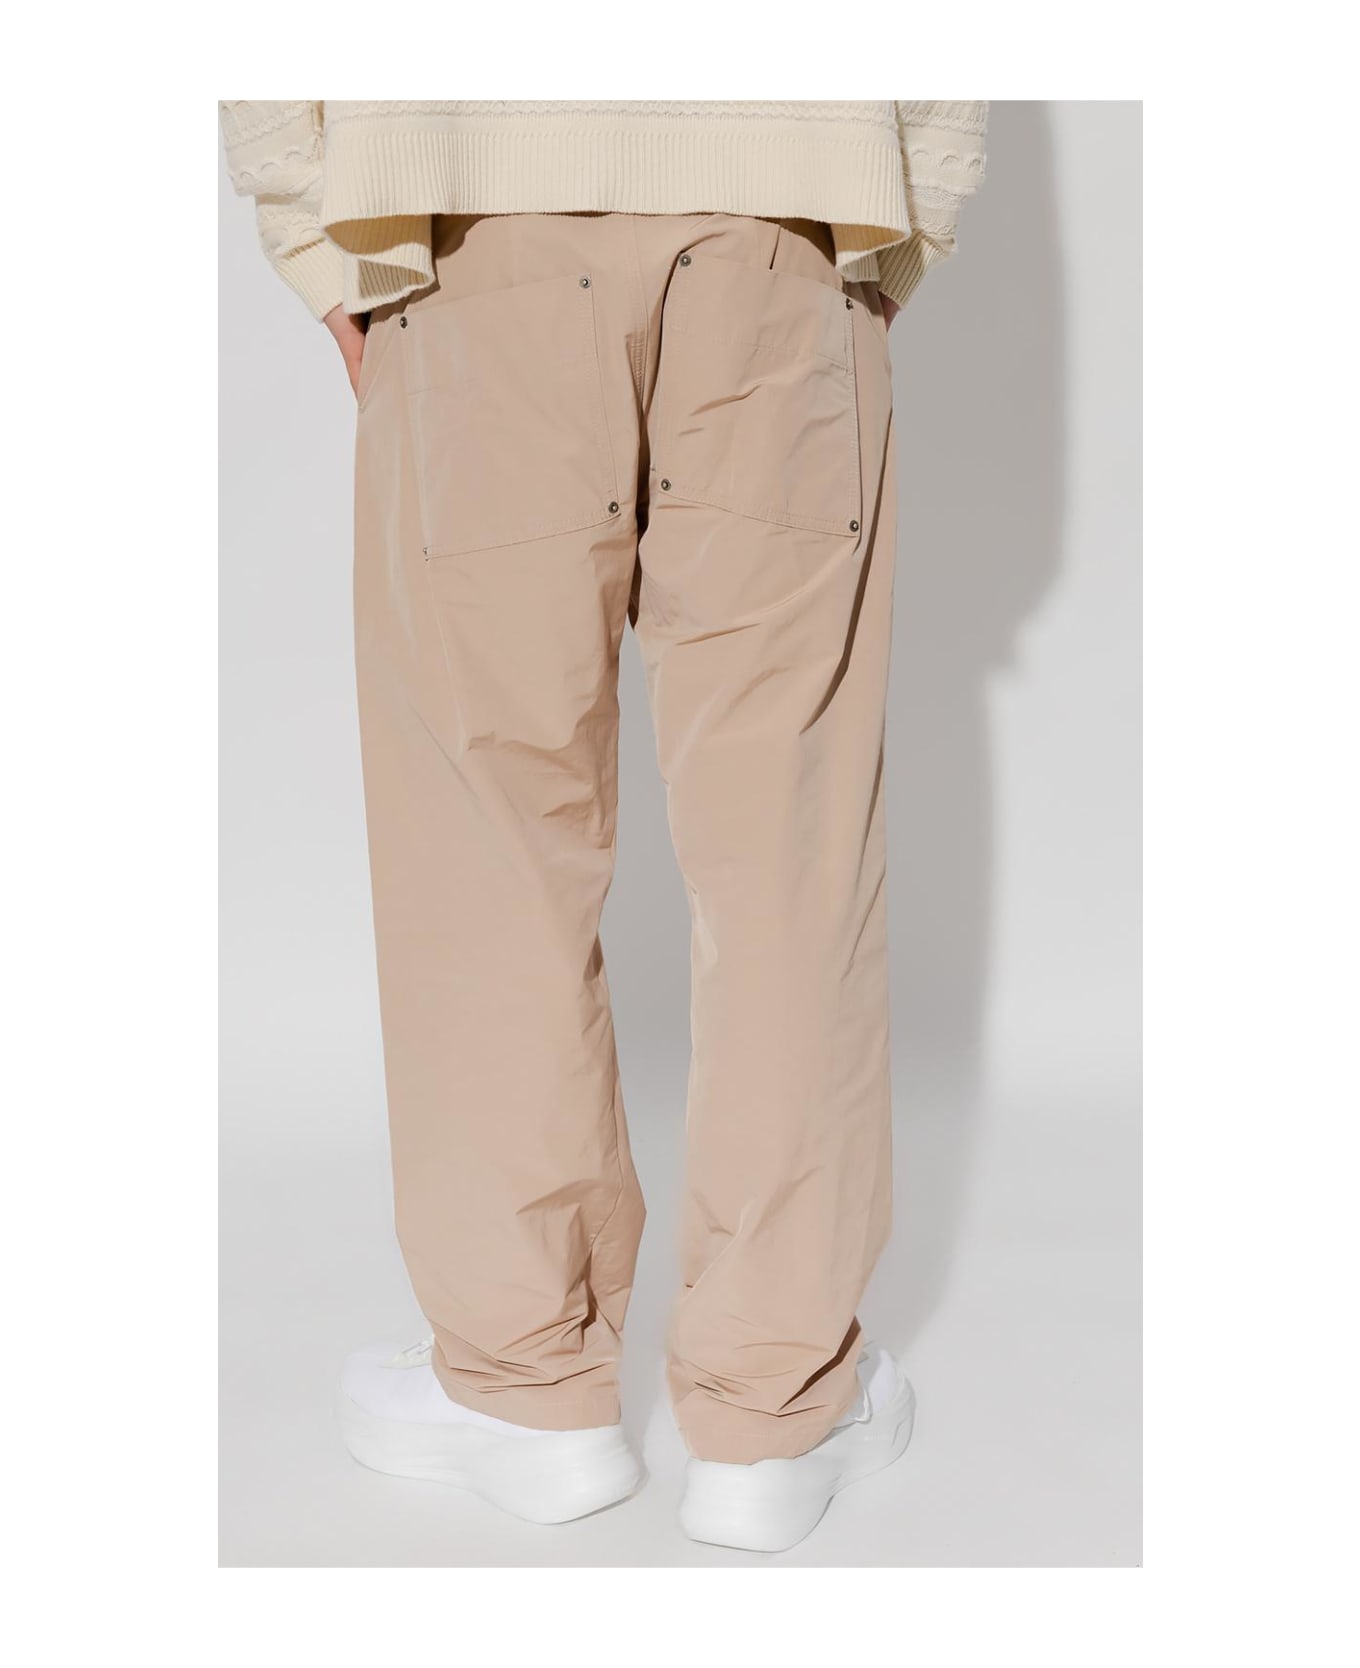 FourTwoFour on Fairfax Trousers With Pockets - Beige ボトムス